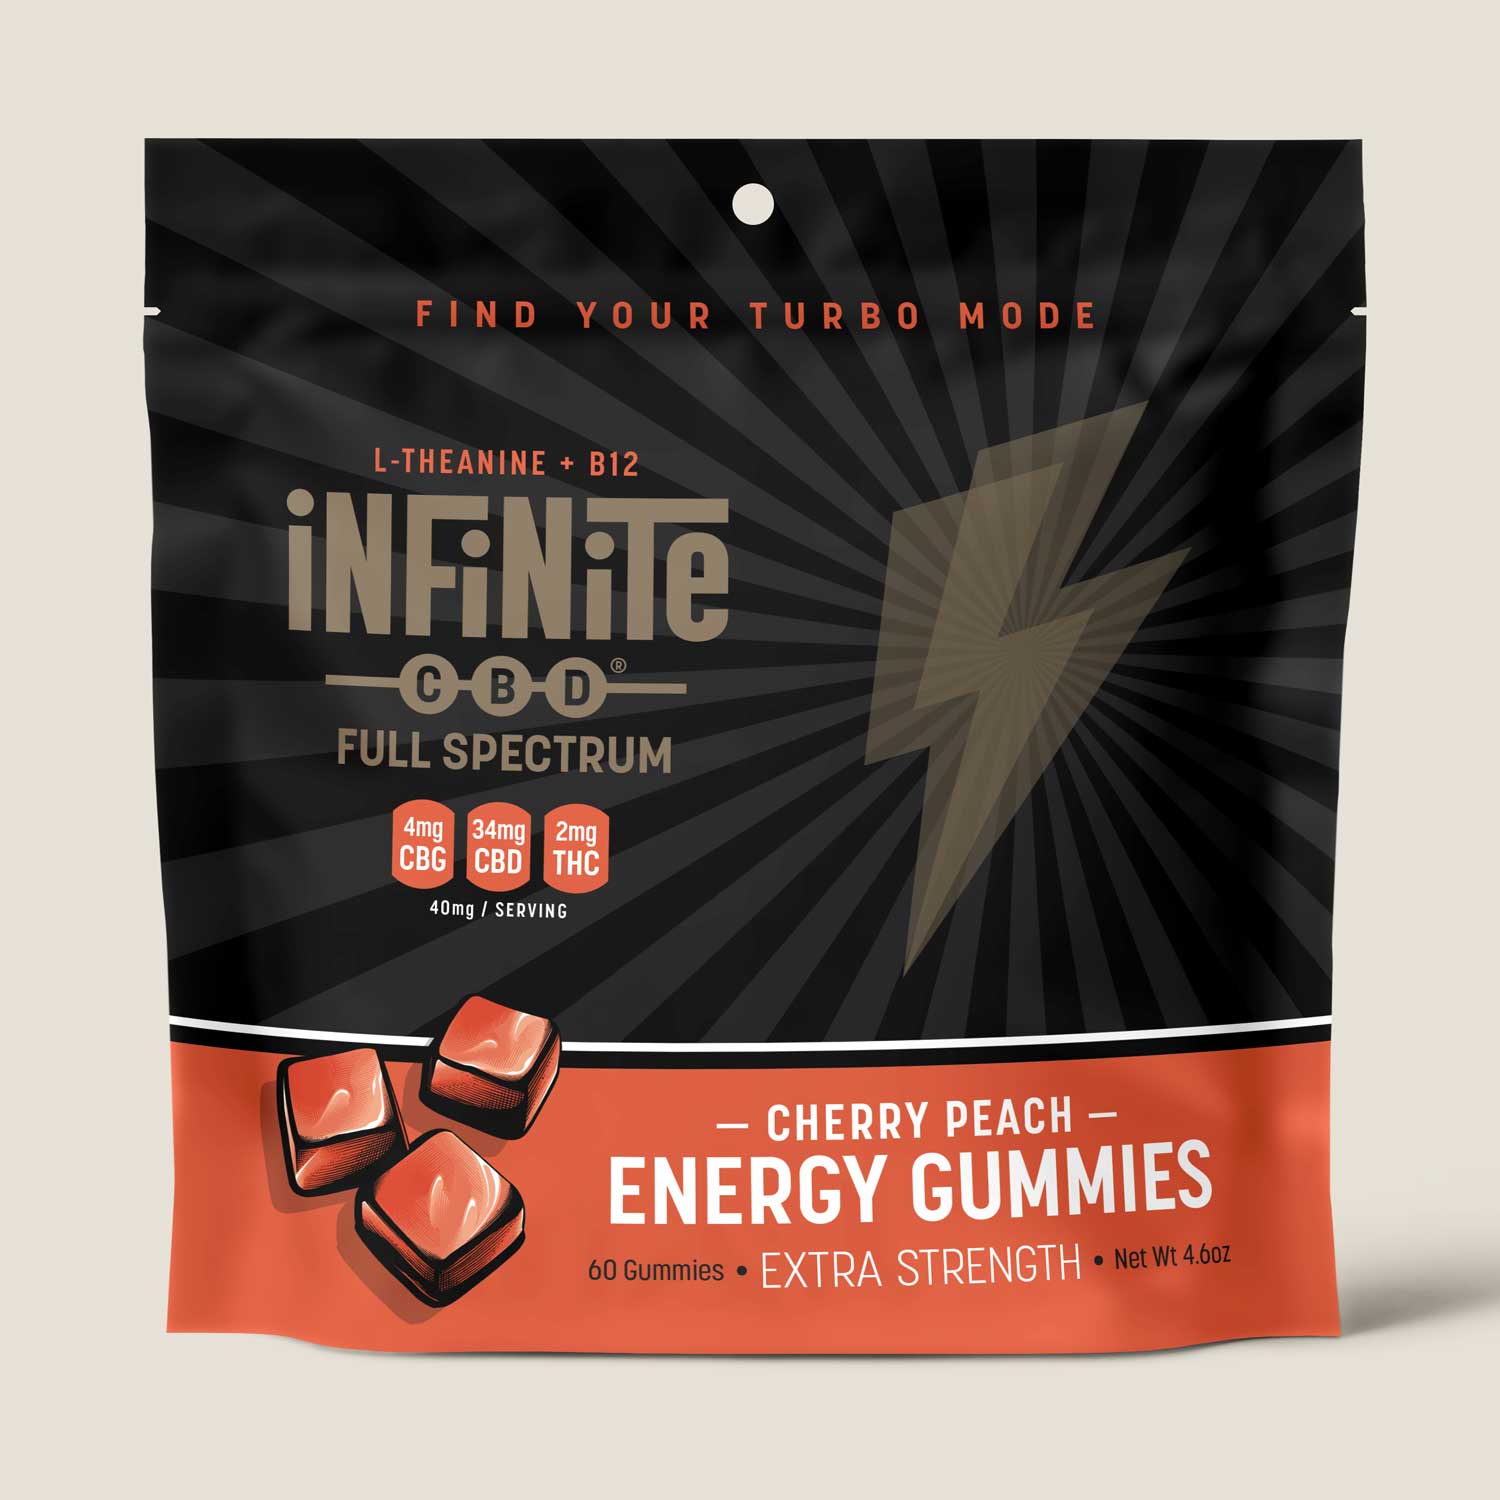 Gummies<br>Formulation: Energy<br>CBD: Full Spectrum (Contains THC)<br>Strength: Extra (40mg/serving)